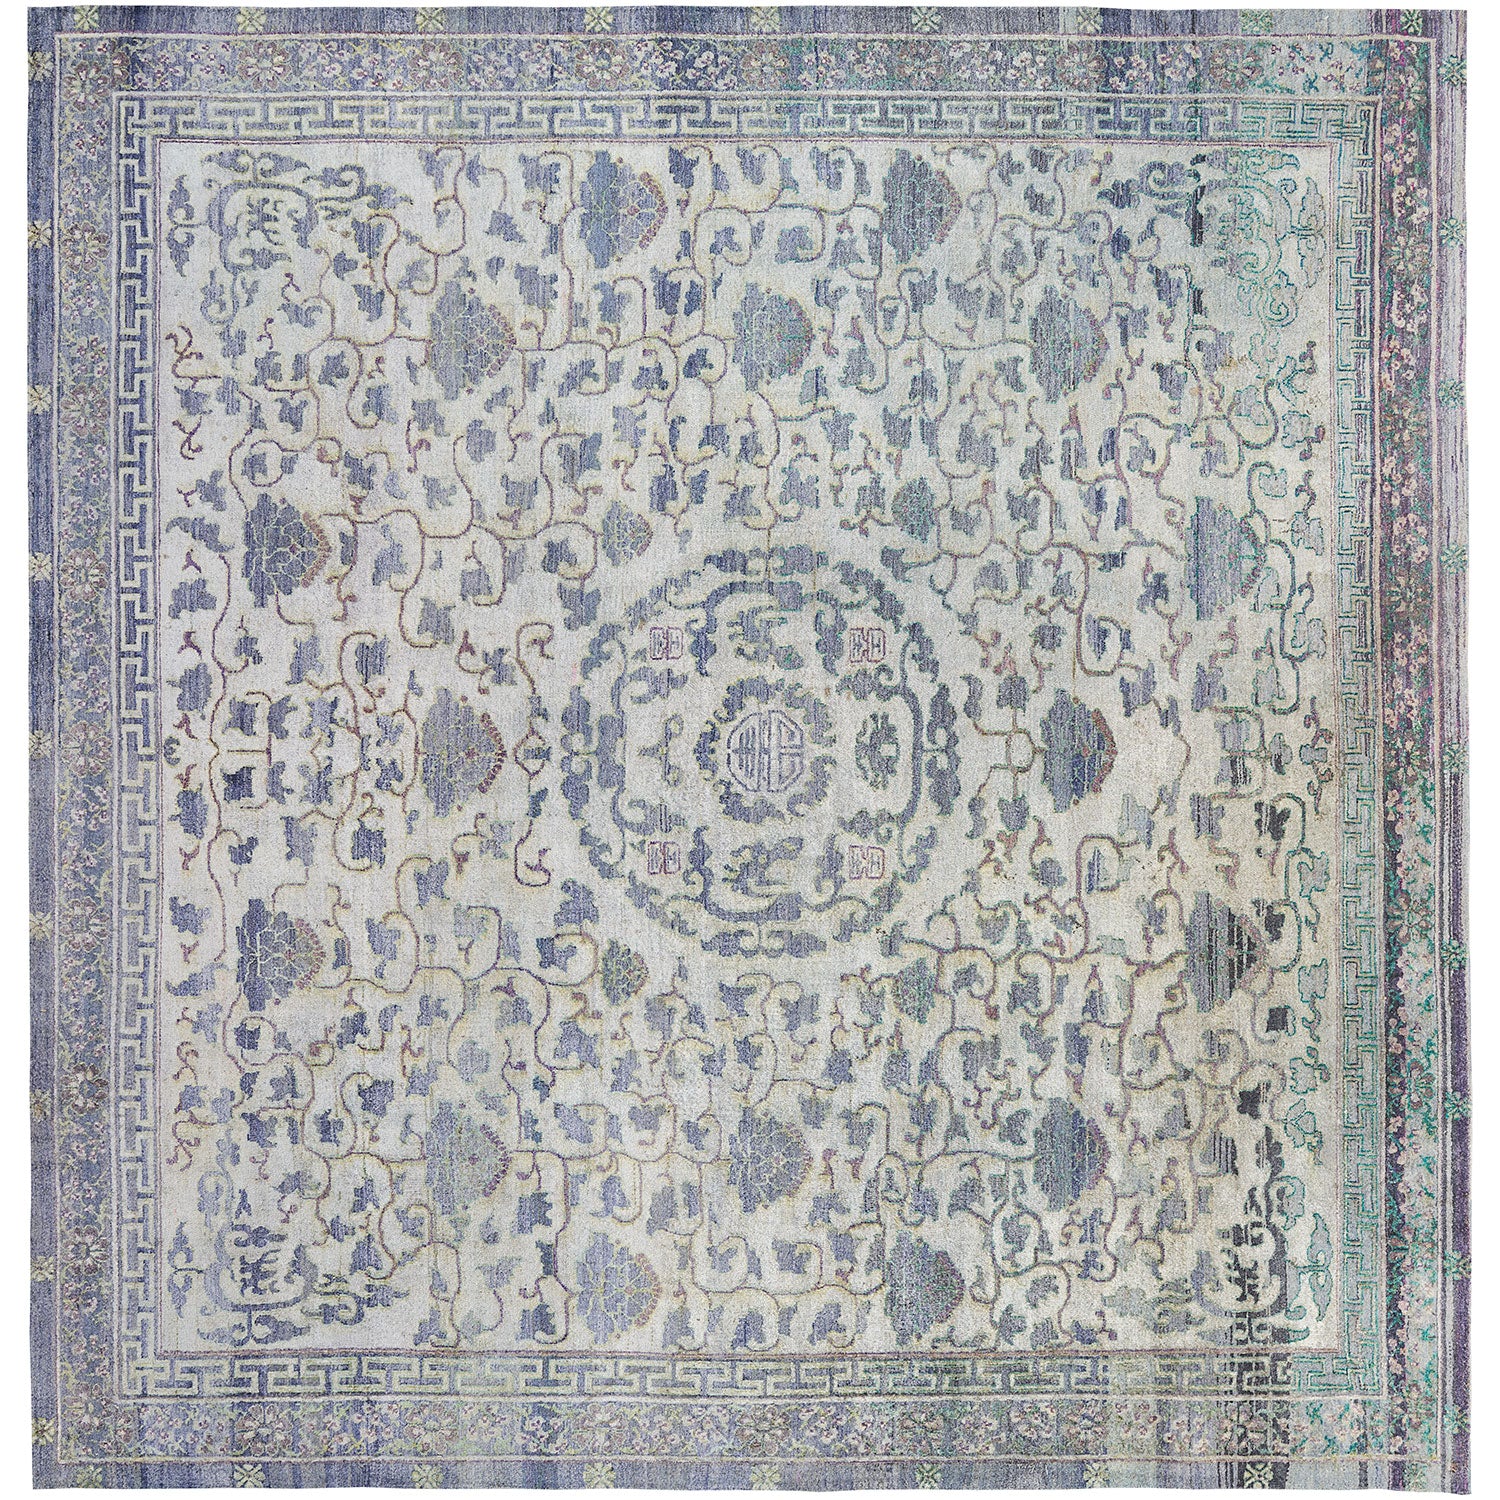 An intricately designed vintage rug with muted colors and symmetrical patterns.